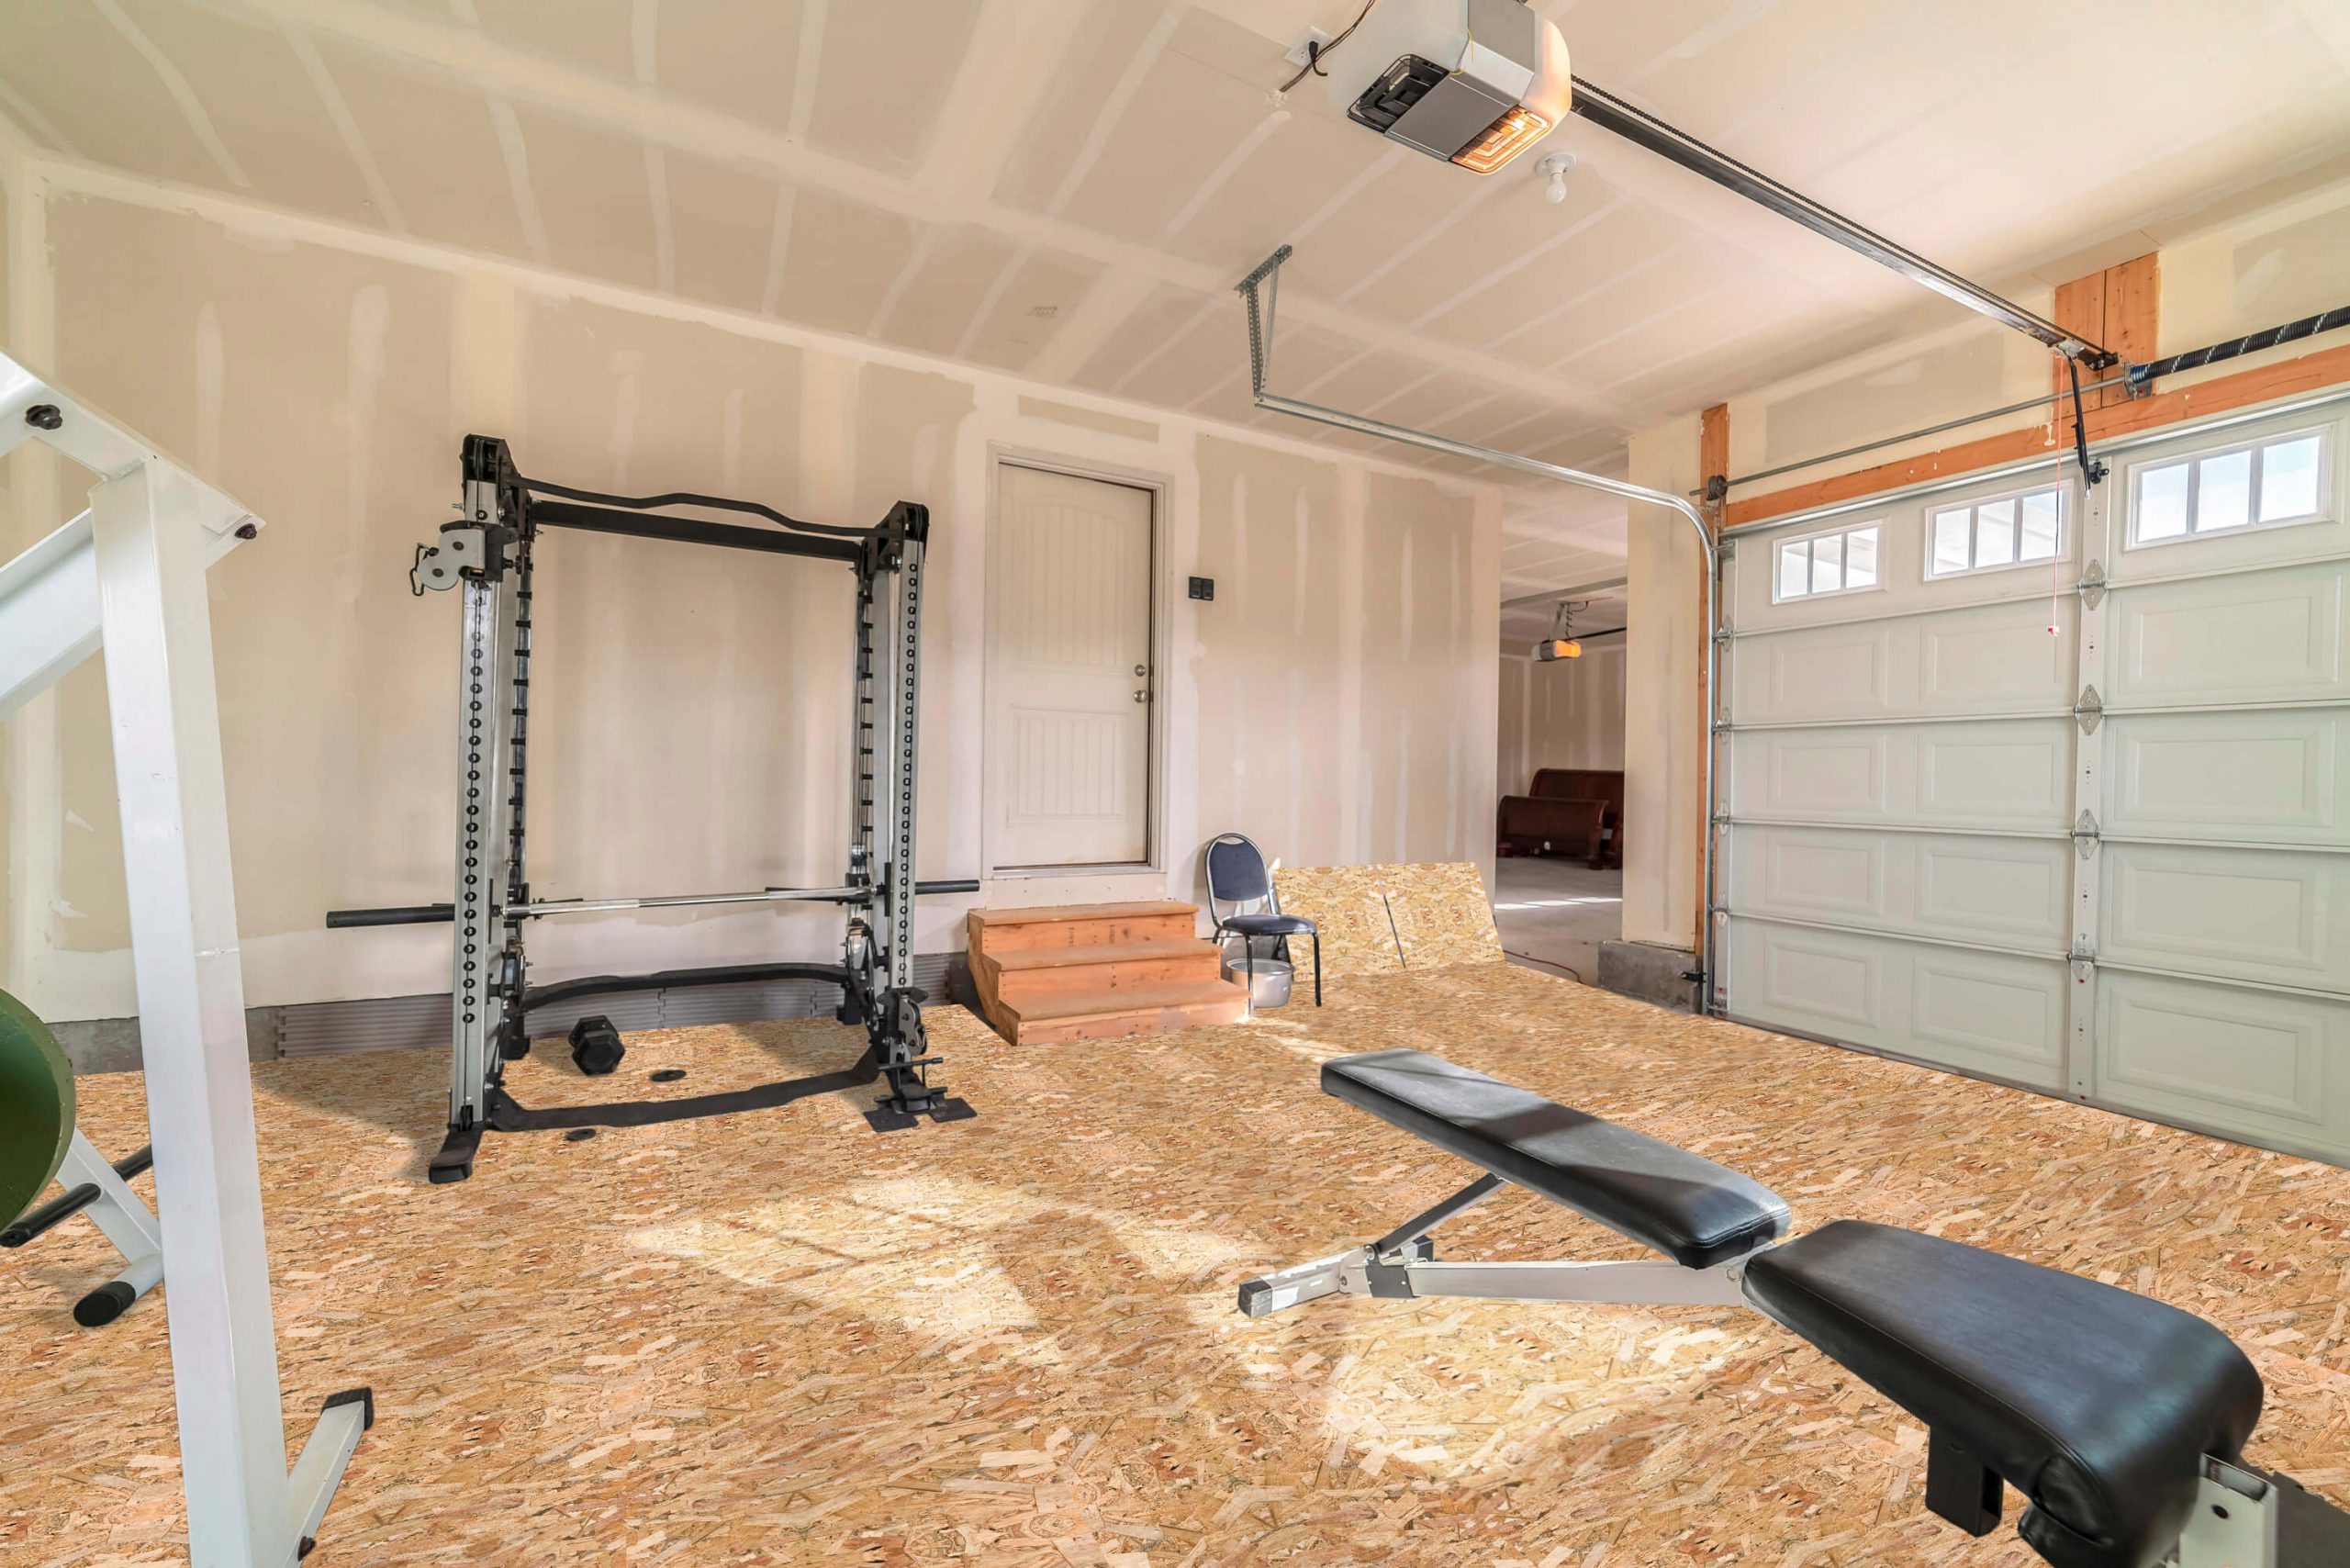 Garage Into Usable Living Space, How To Convert A Garage Into Family Room